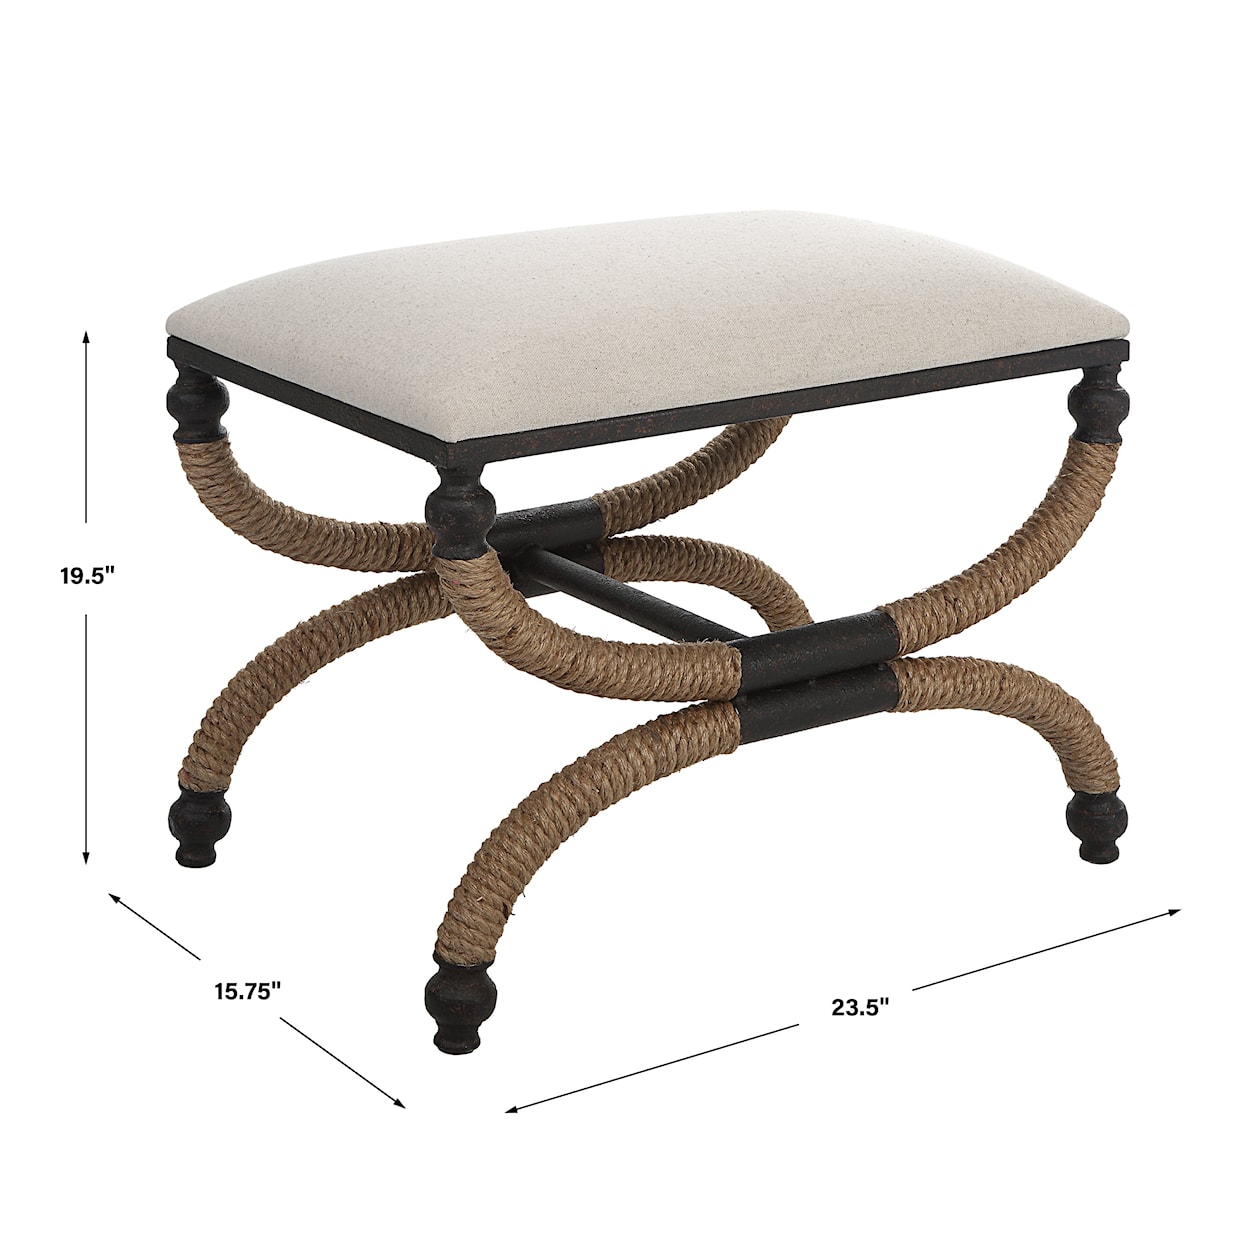 Uttermost Icaria Icaria Upholstered Small Bench